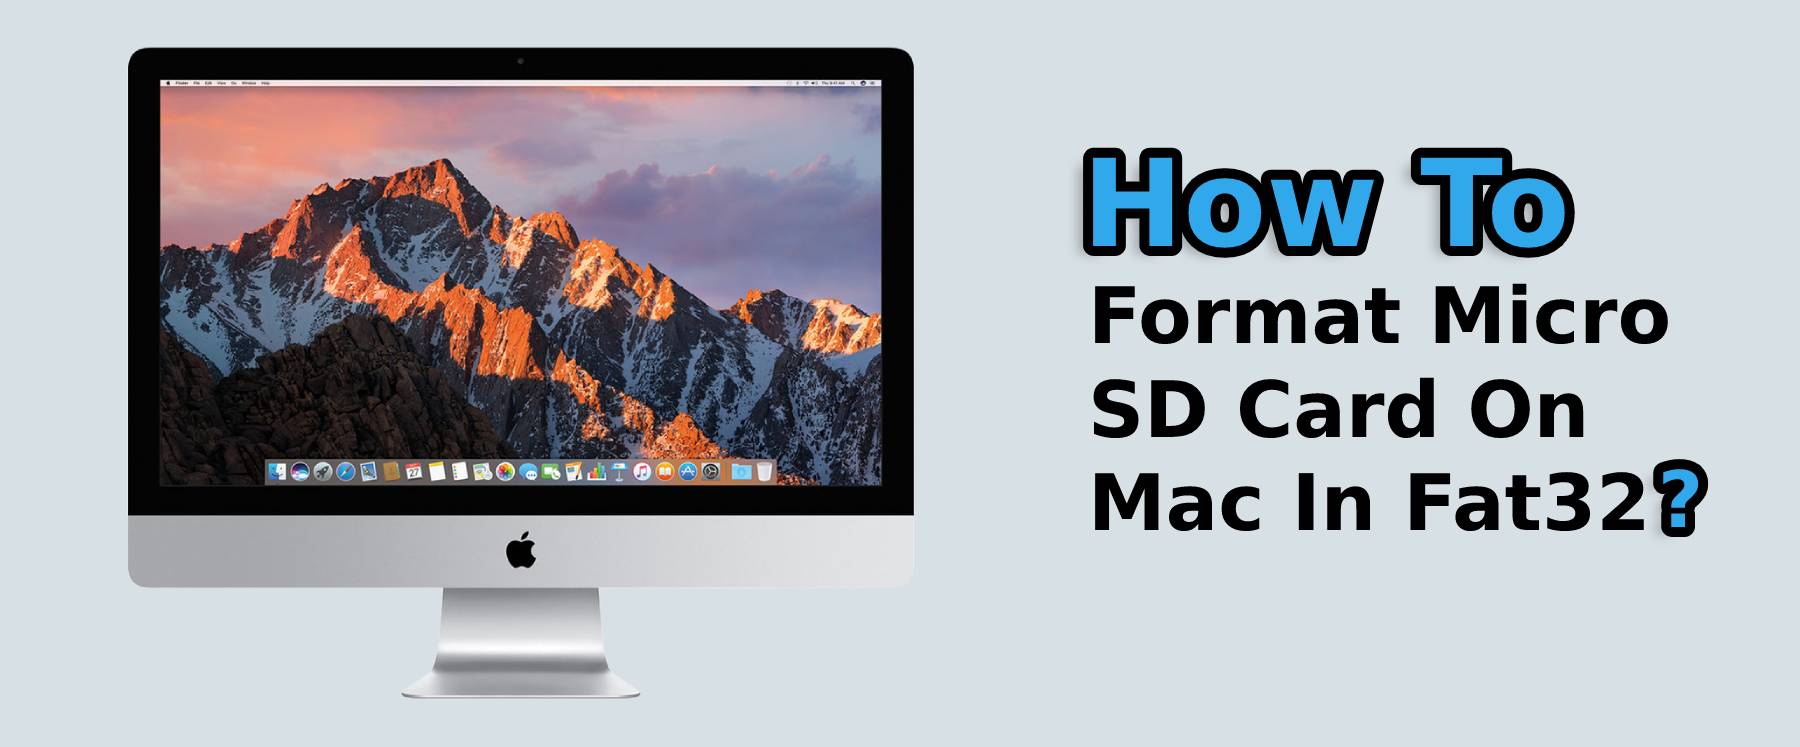 How to Format Corrupted Micro Sd Card On Mac In Fat32 File System